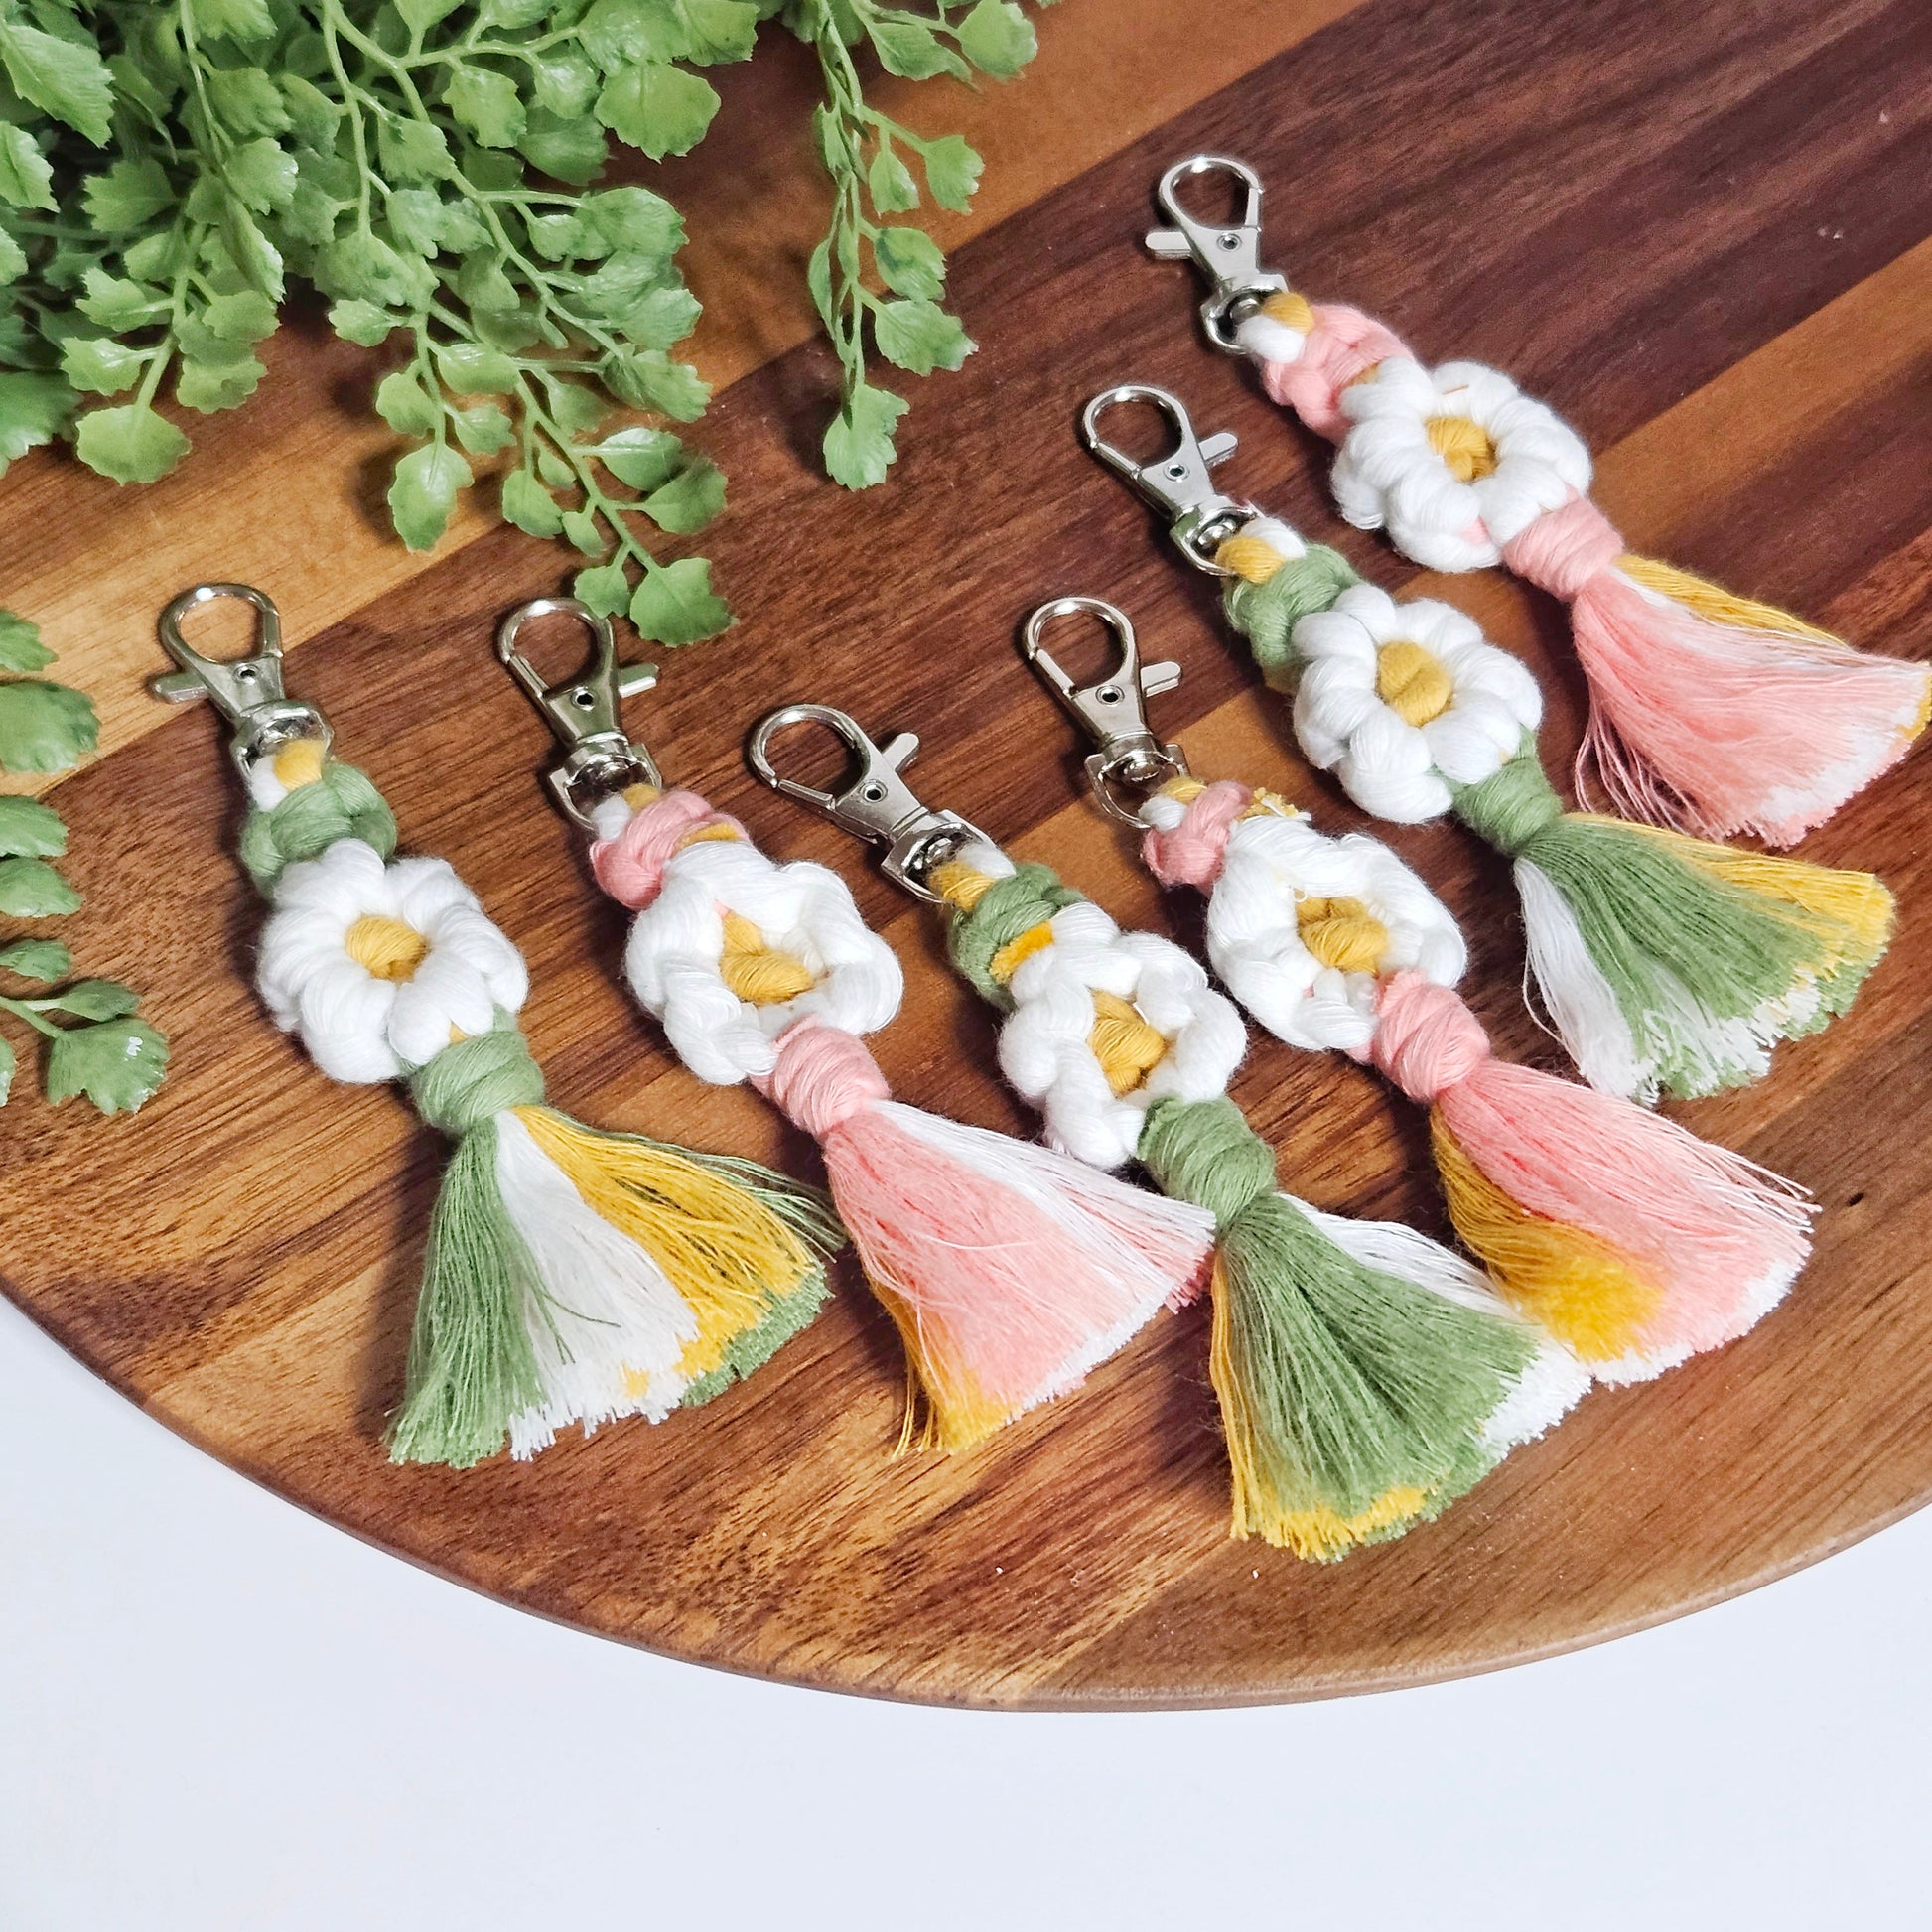 Handmade macrame flower keychains. 100% cotton. boho chic gifts for her.